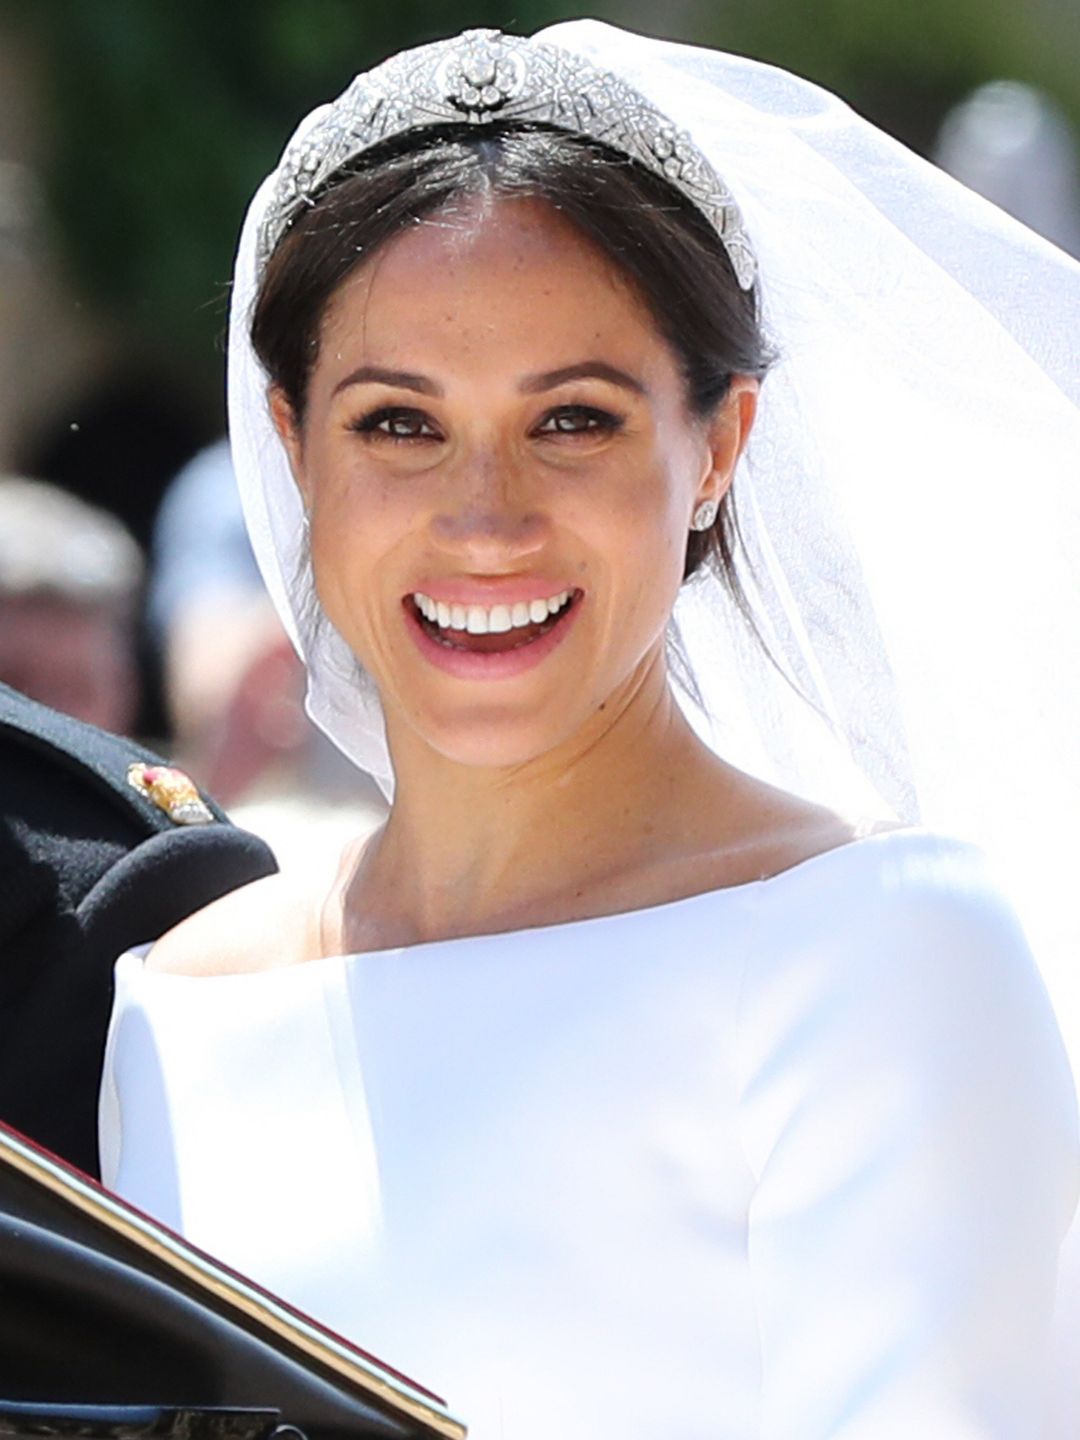 Meghan Markle wore sheer foundation that showed off her freckles on her wedding day